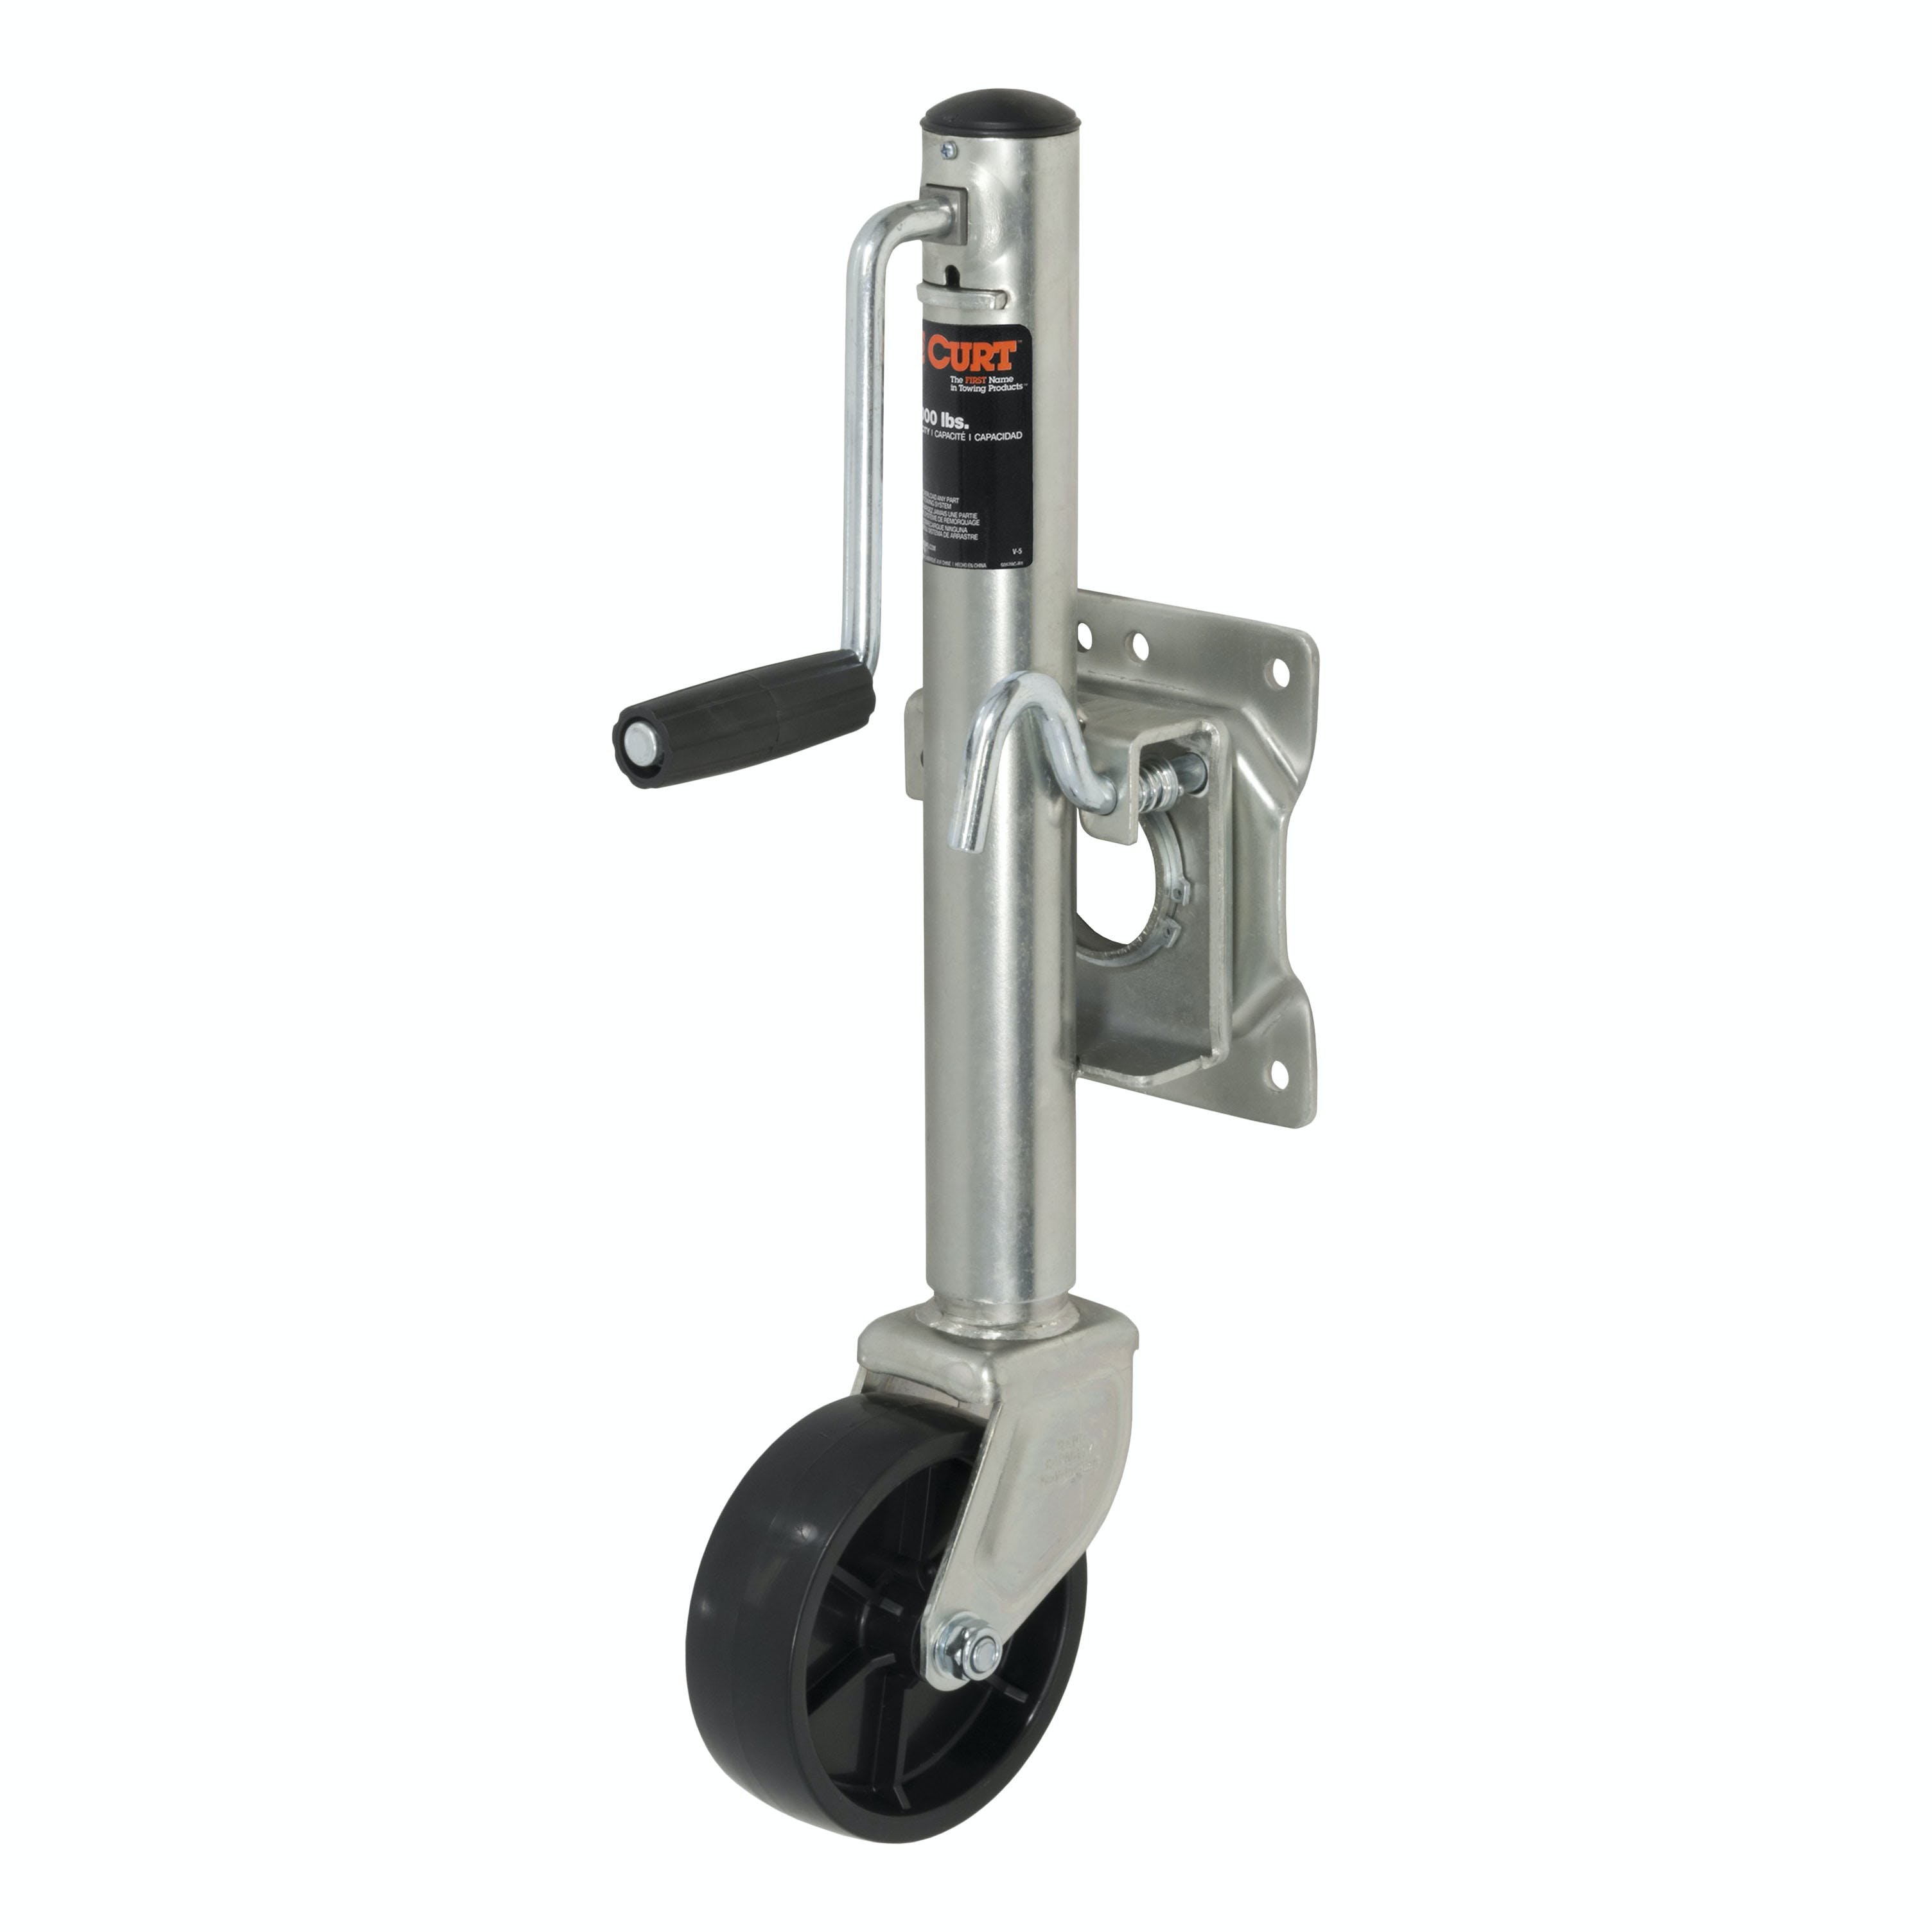 CURT 28101 Marine Jack with 6 Wheel (1,000 lbs, 10 Travel, Packaged)